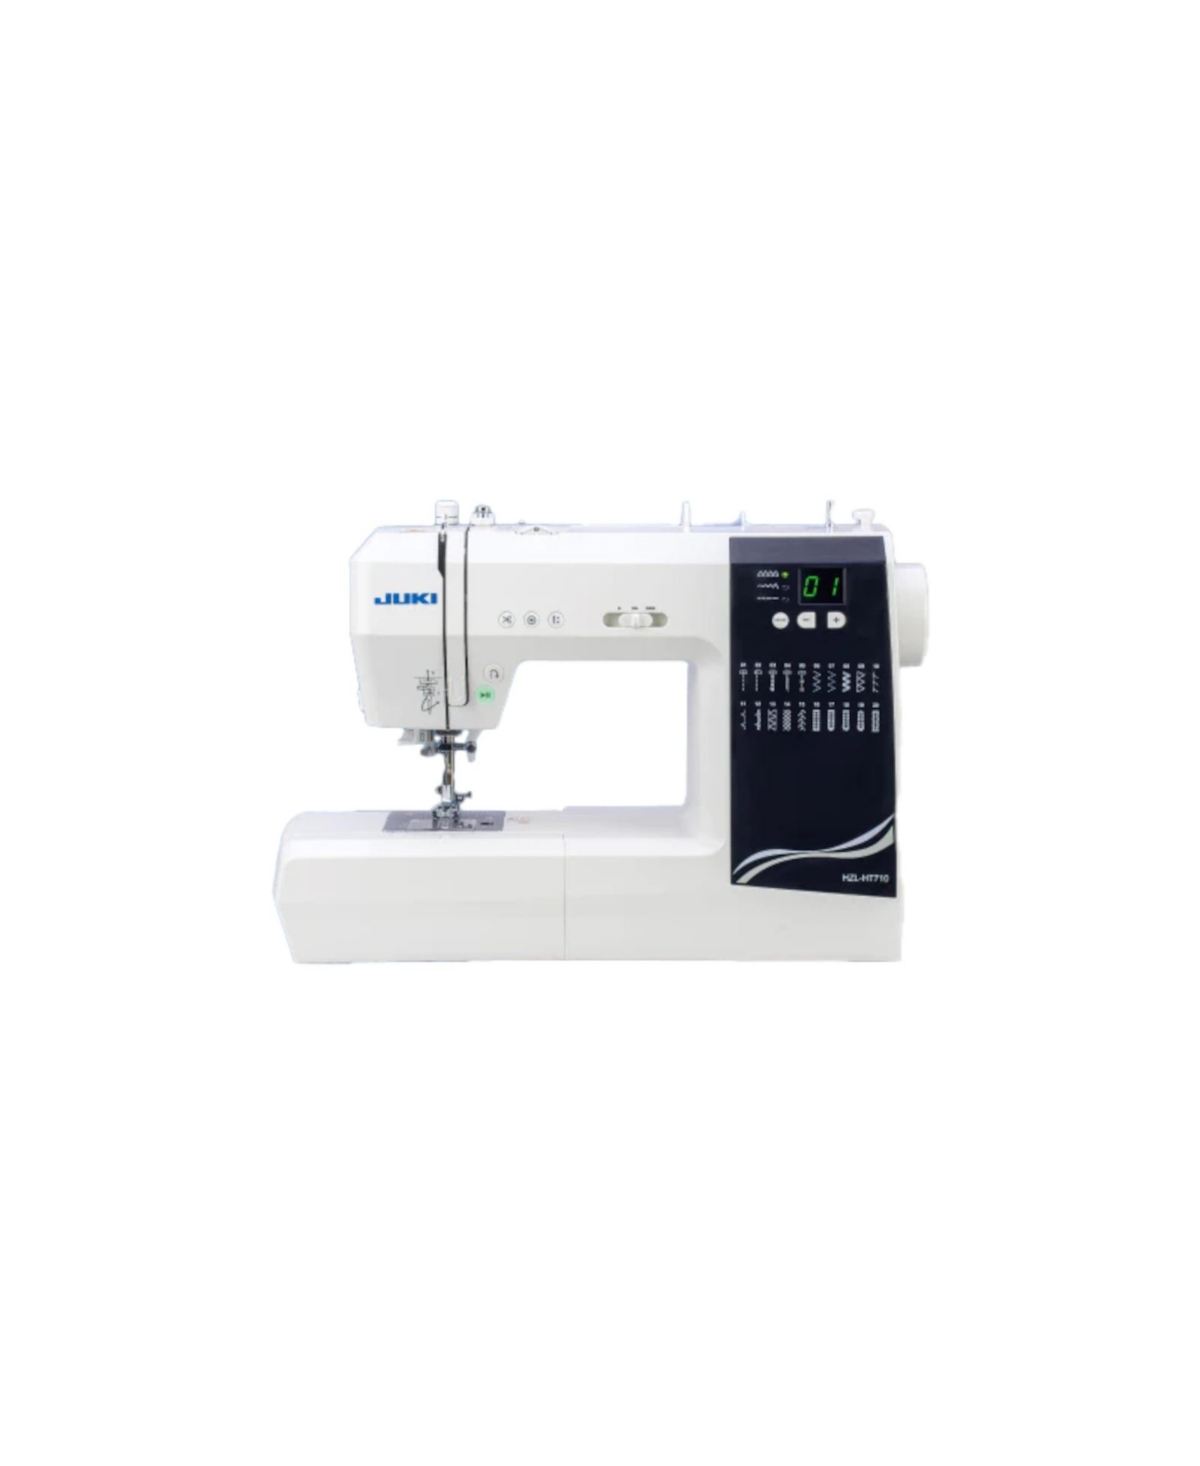 Hzl-HT710 Sewing Machine Computerized - White